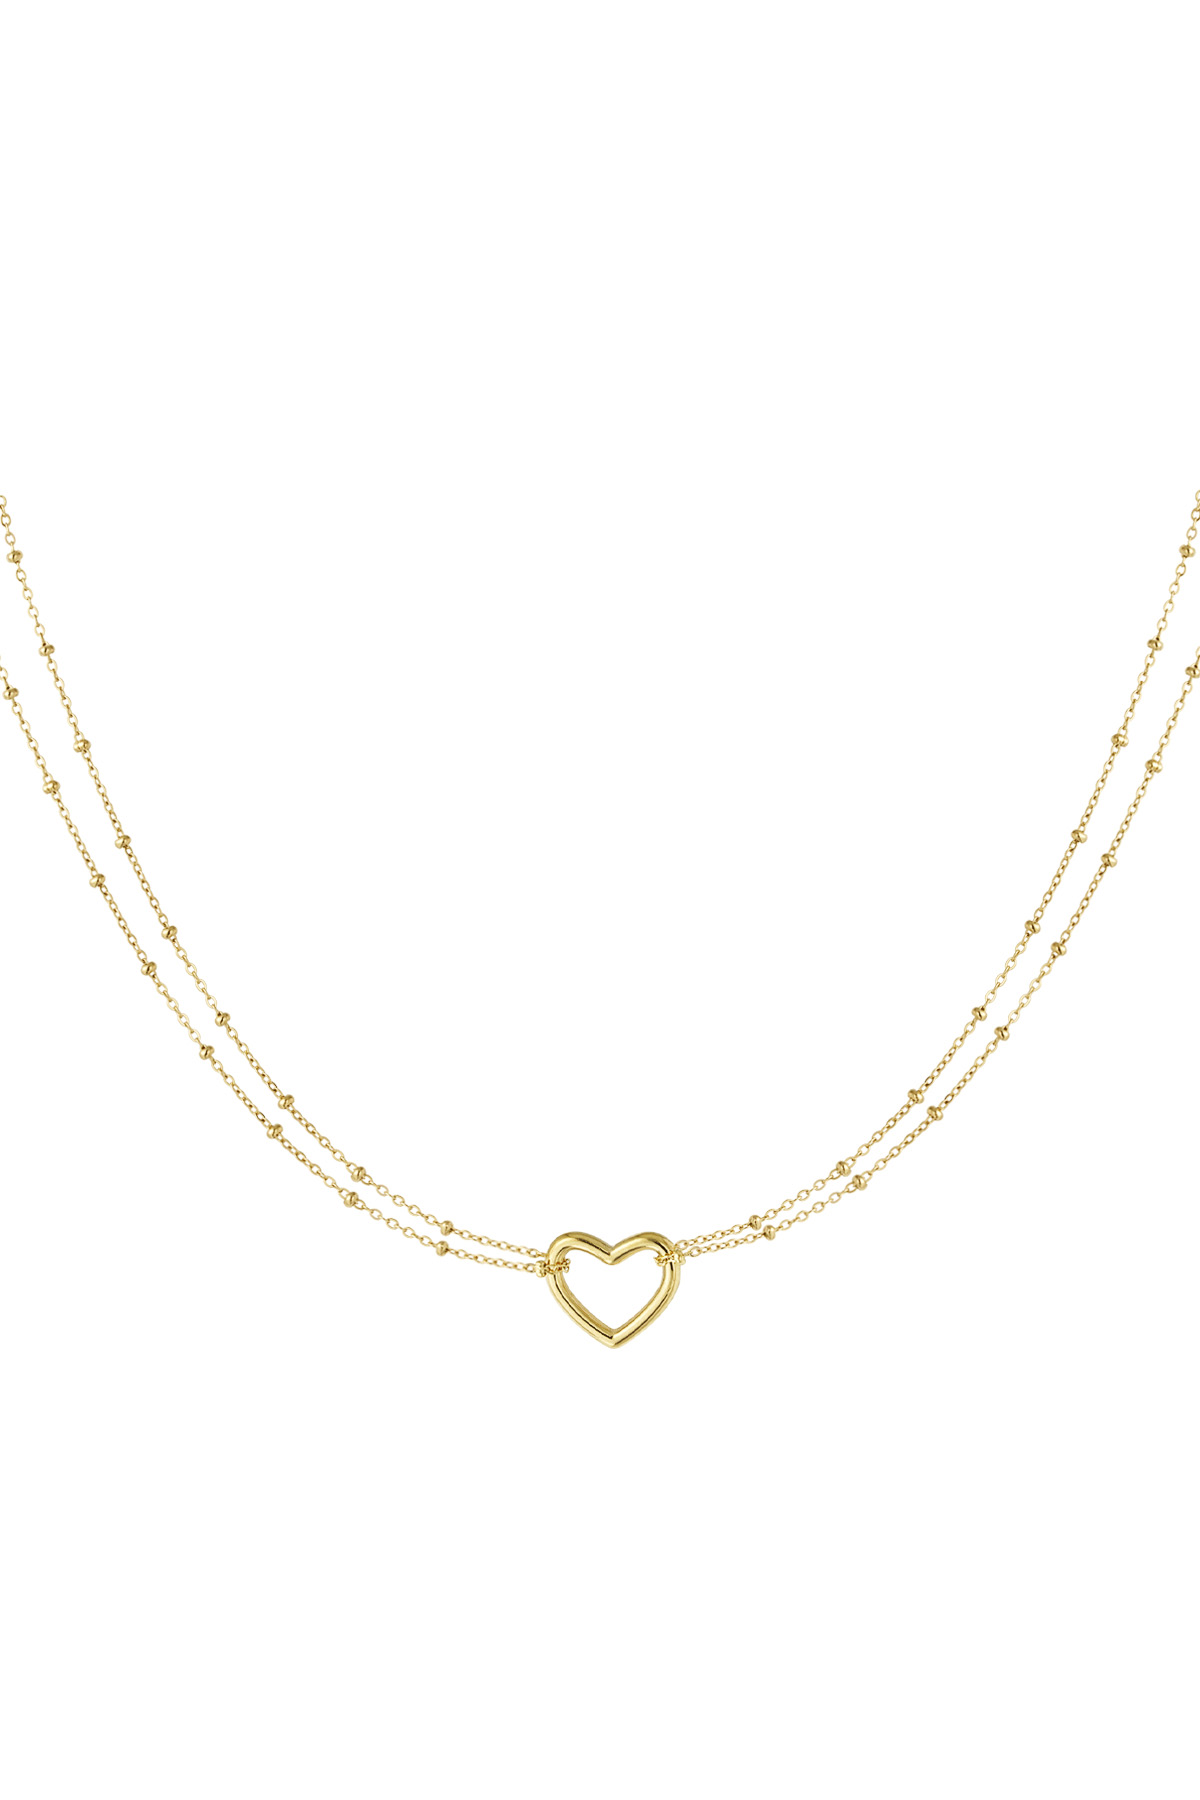 Necklace heart hue - gold